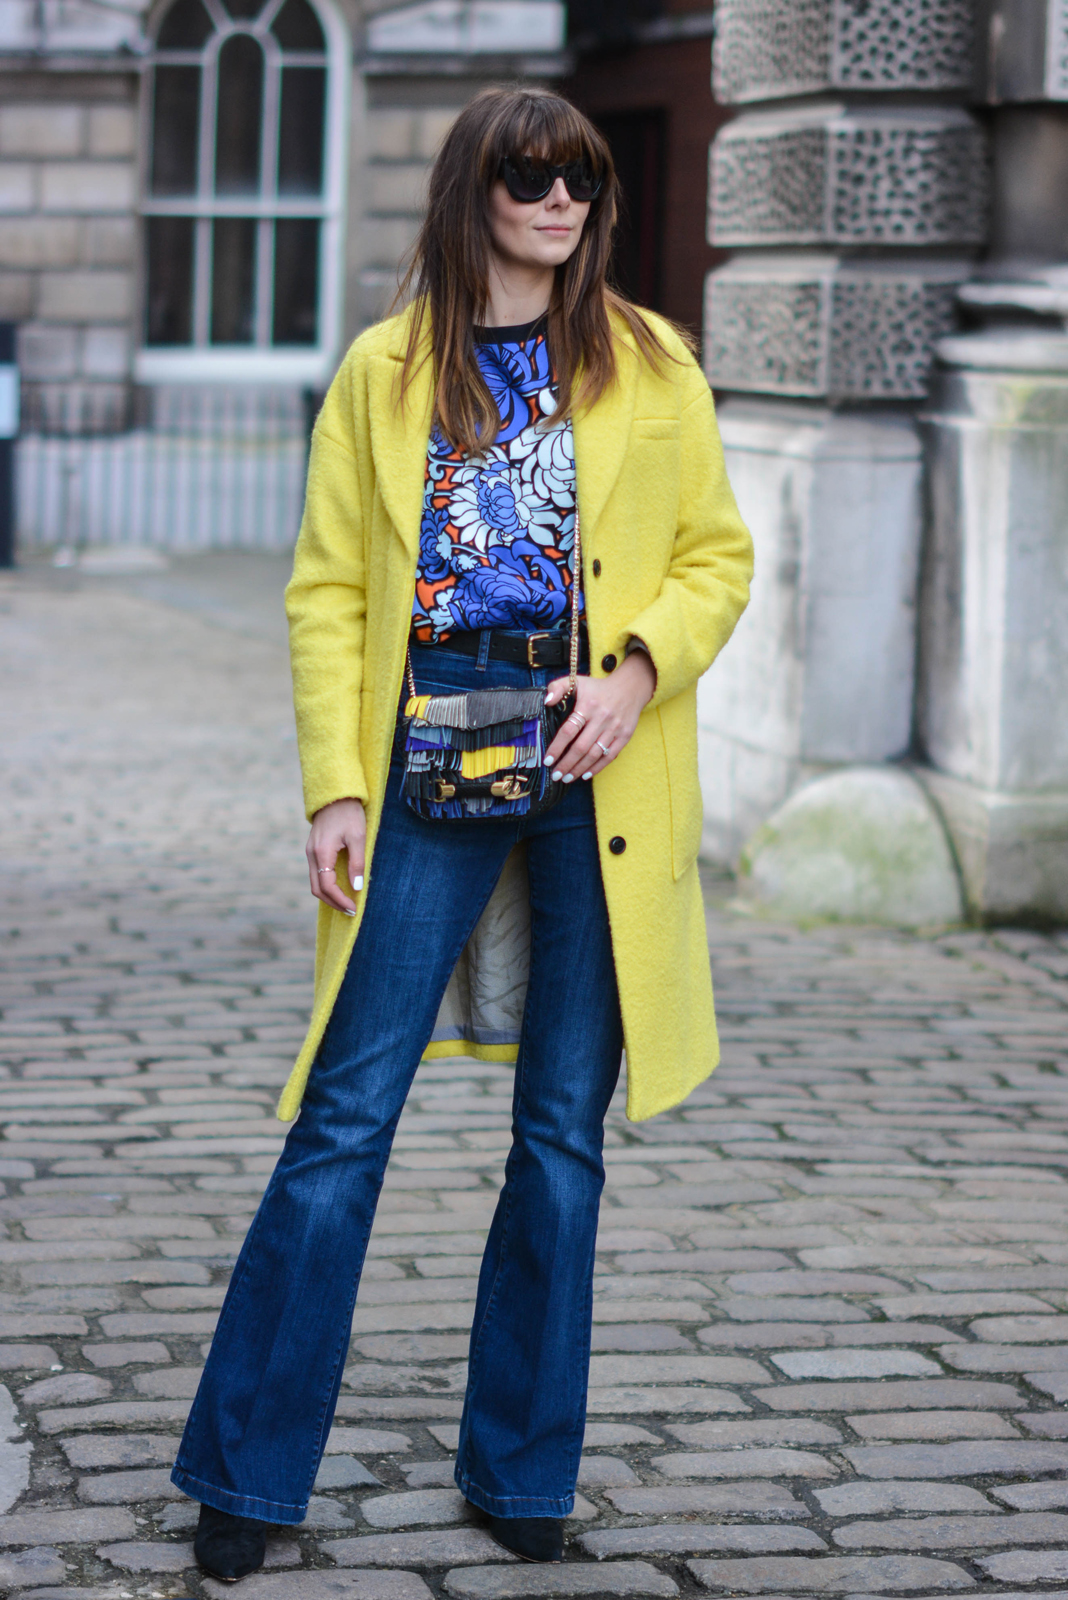 EJSTYLE - Emma Hill, London Fashion Week, LFW AW15, LFW FW15, Street style, Topshop 70's top, Flare jeans, Yellow coat, OOTD, Topshop print blouse, Jimmy choo fringe bag